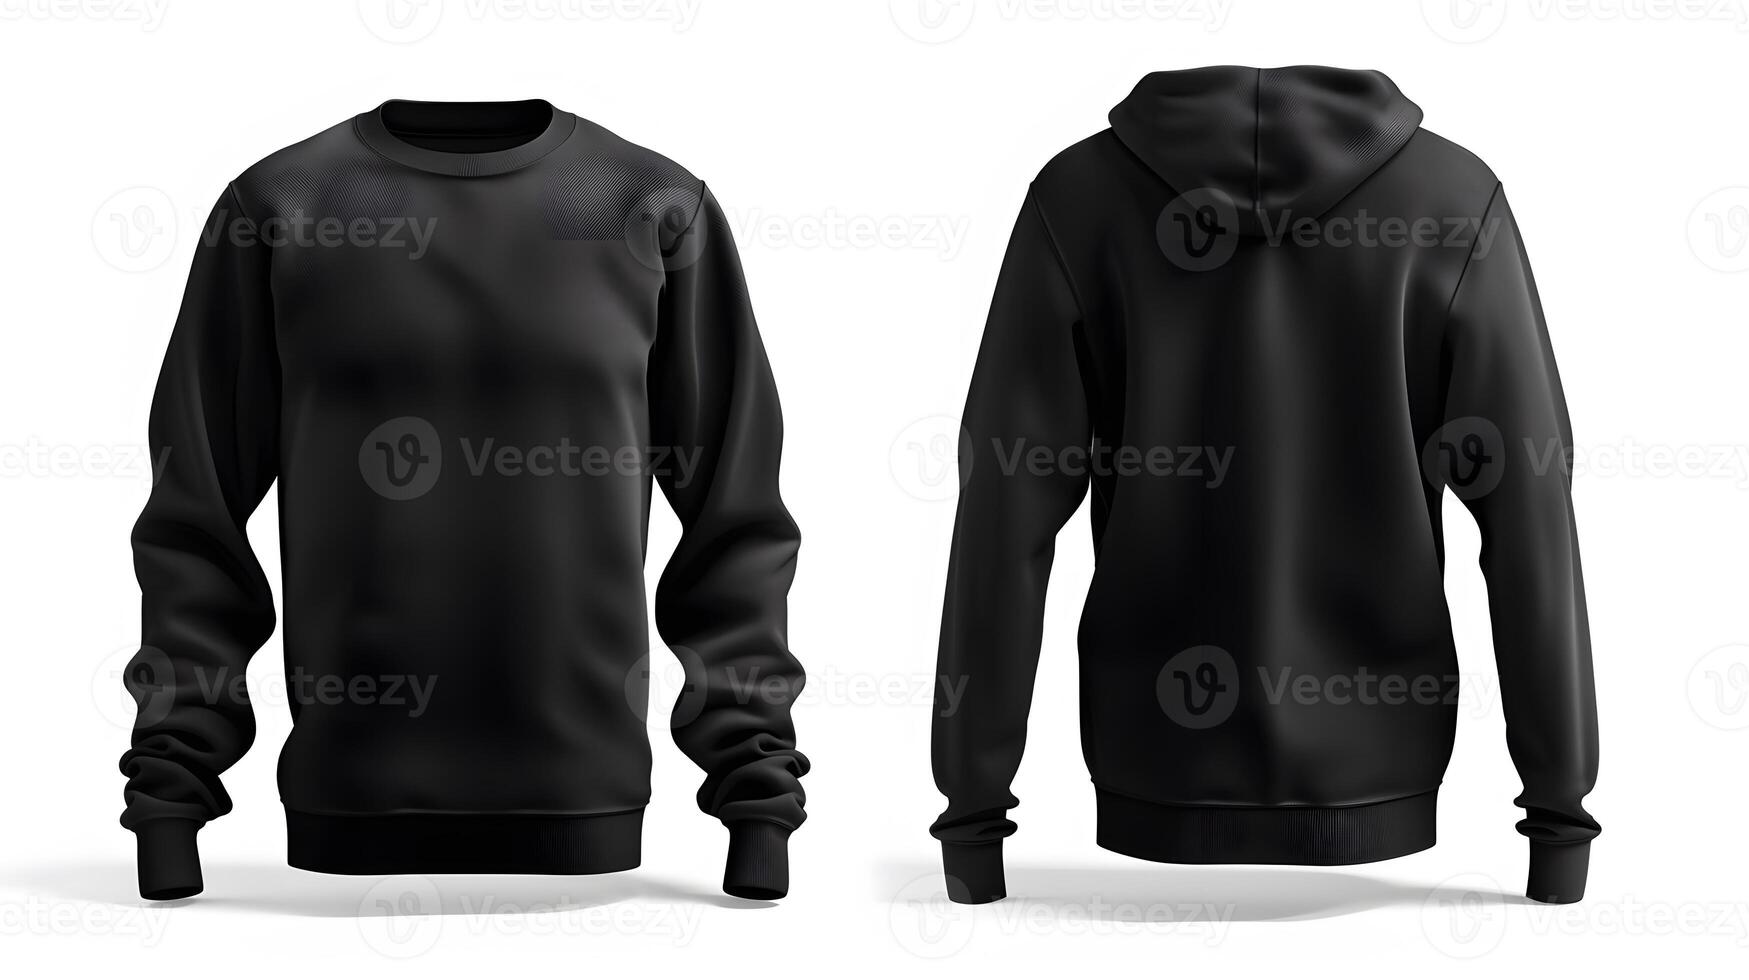 hoody for design mockup for print, isolated on white background photo